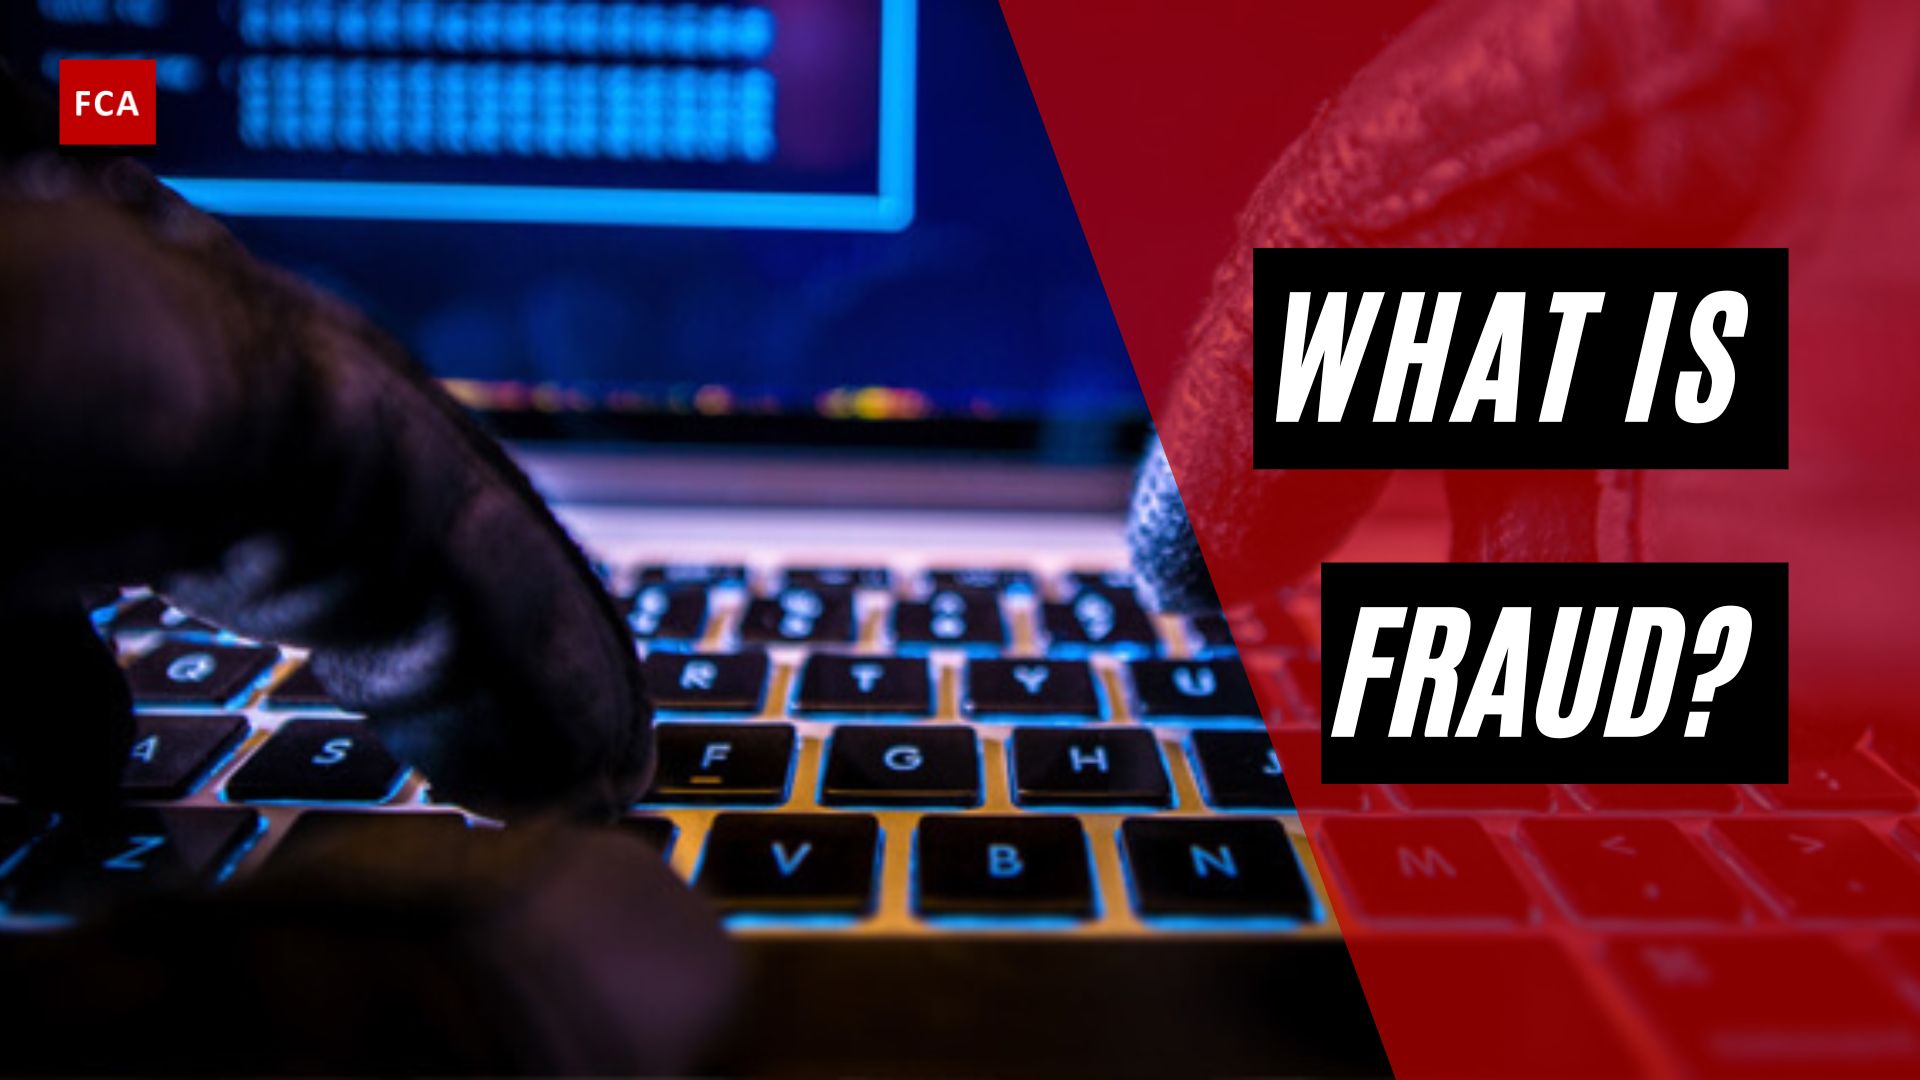 What Is Fraud?